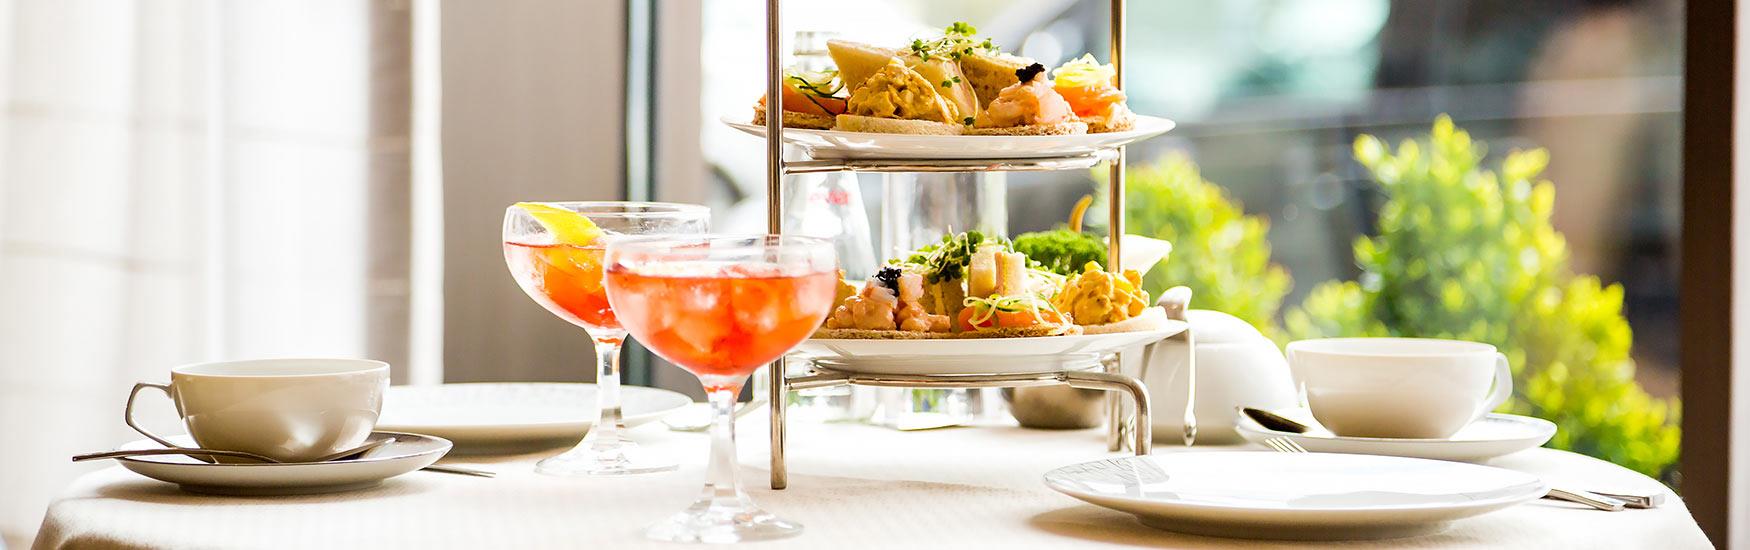 A delicious looking afternoon tea with cocktails